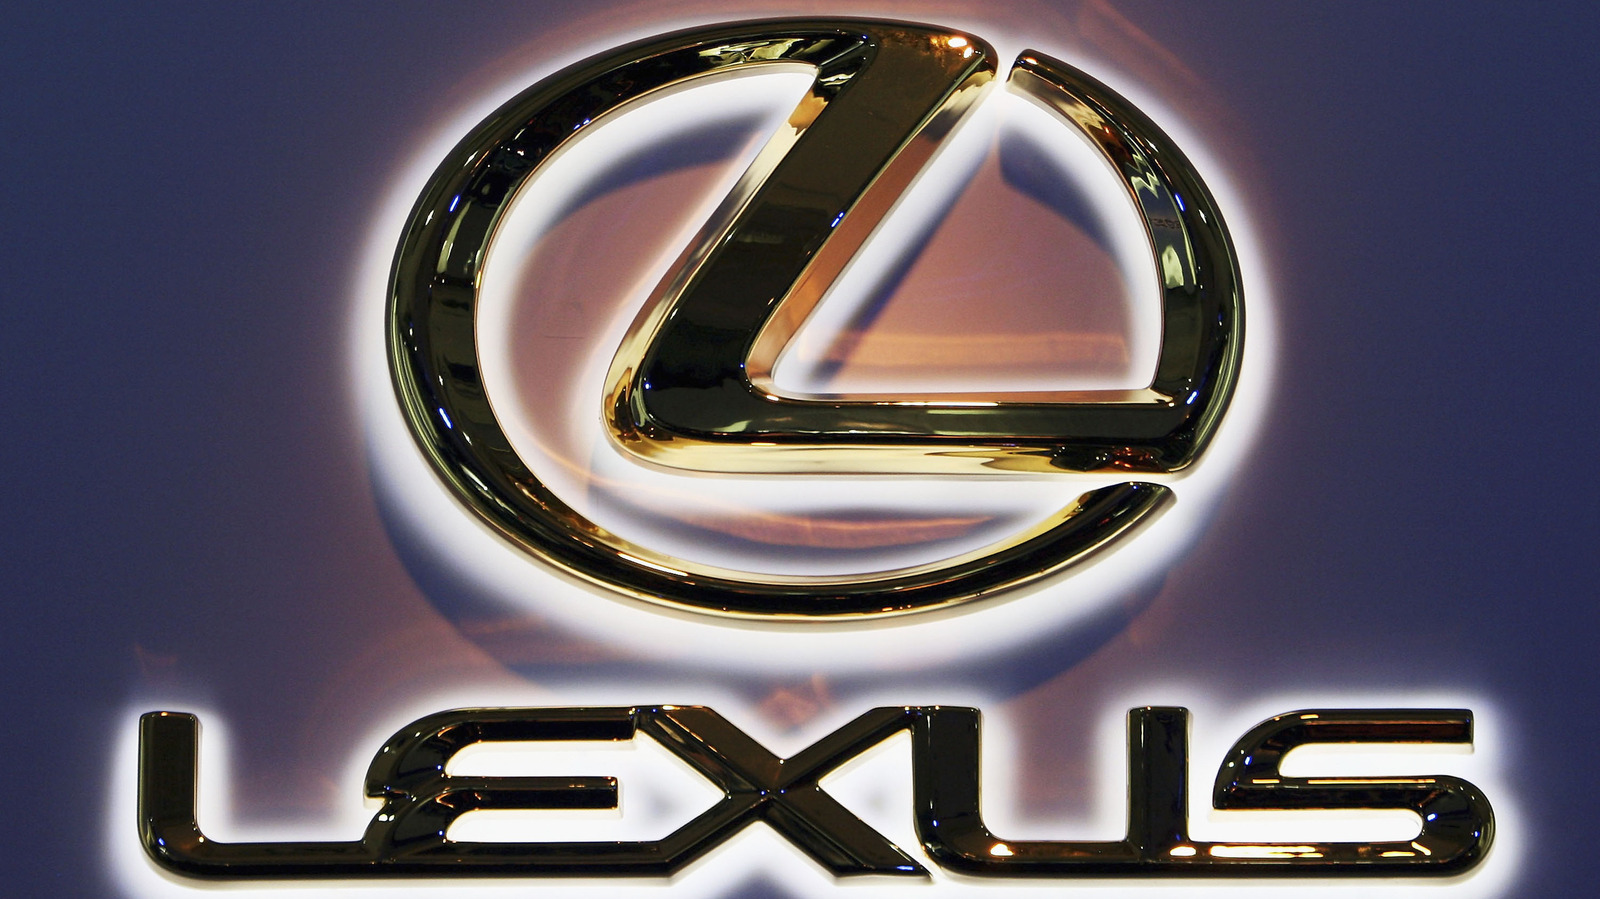 5 Little-Known Facts About Lexus For Car Enthusiasts